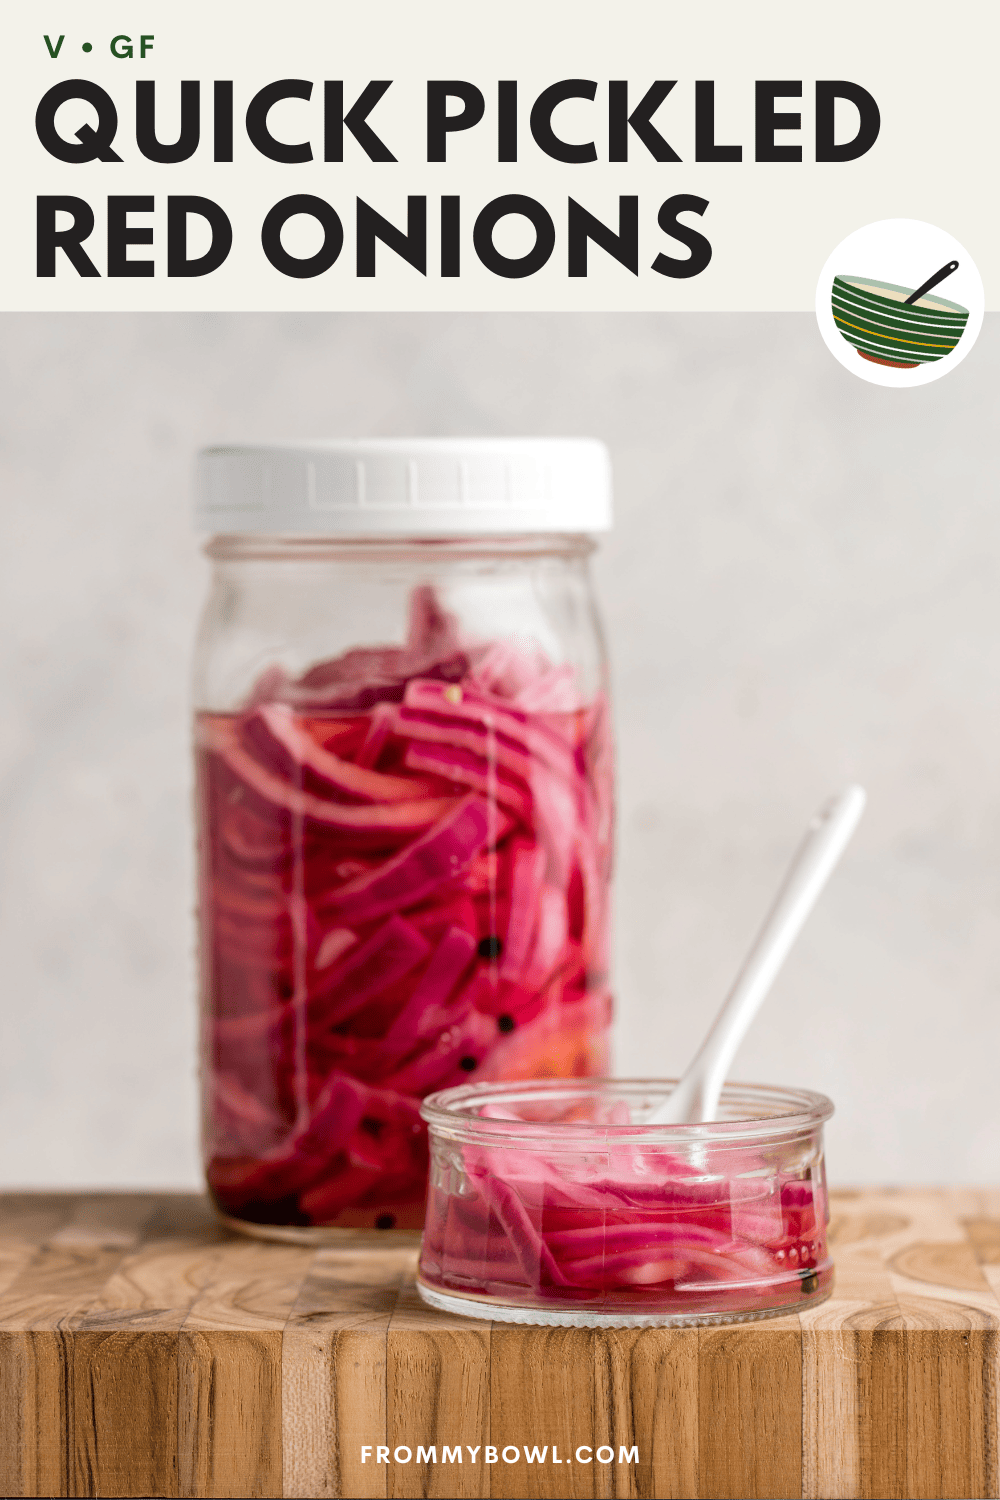 pickled red onions served in a small glass plate with a glass jar of pickled red onions in the background